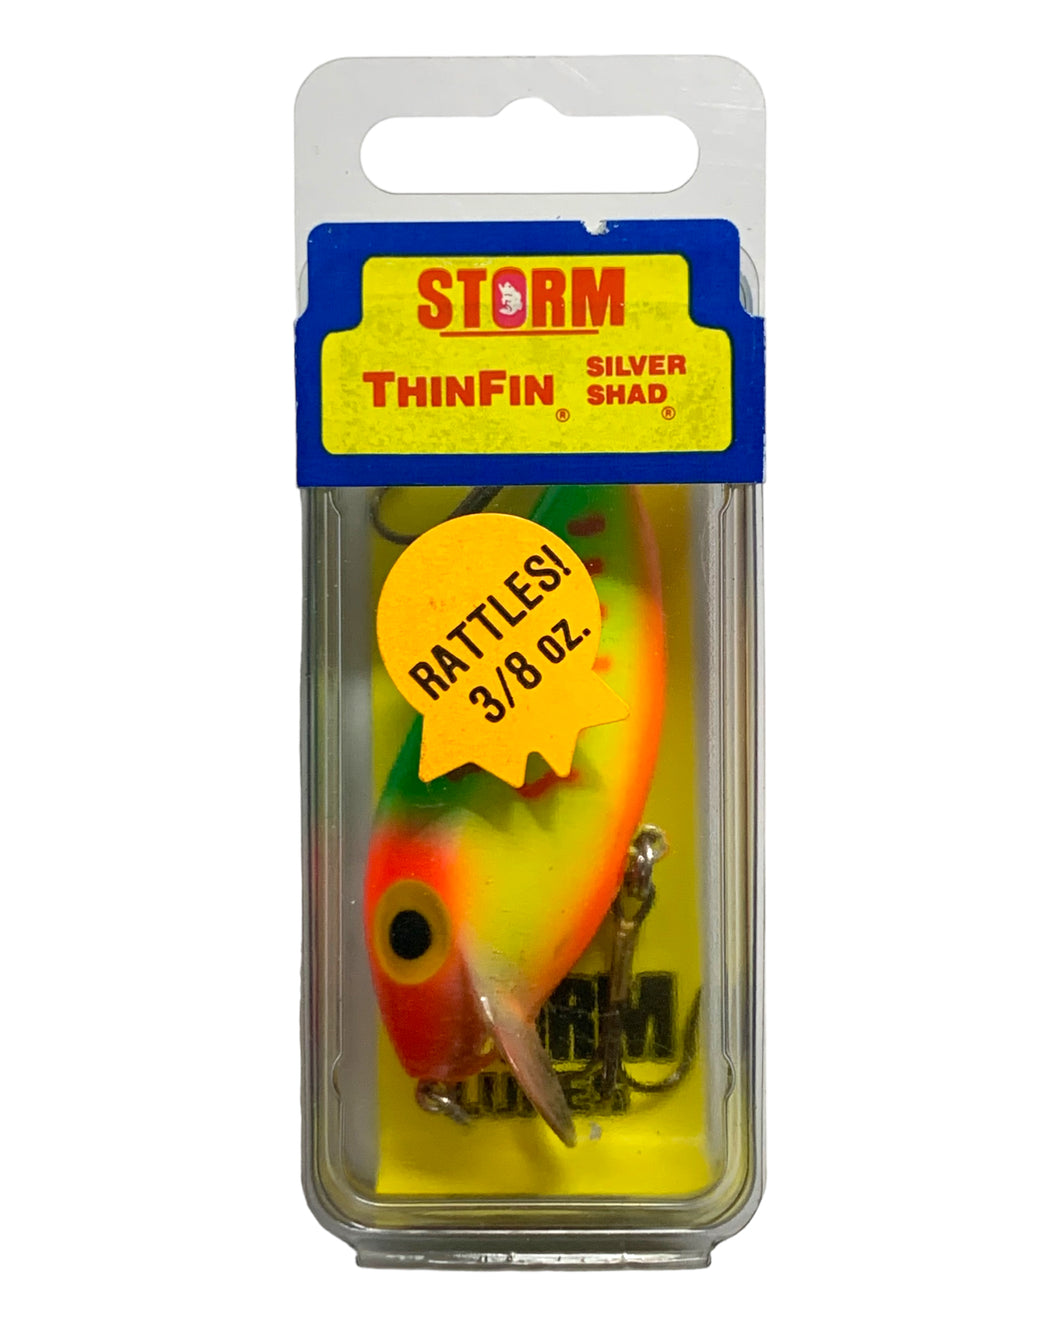 Front Package View of STORM LURES RATTLIN' THINFIN SILVER SHAD Fishing Lure in RED HOT TIGER. Available at Toad Tackle.